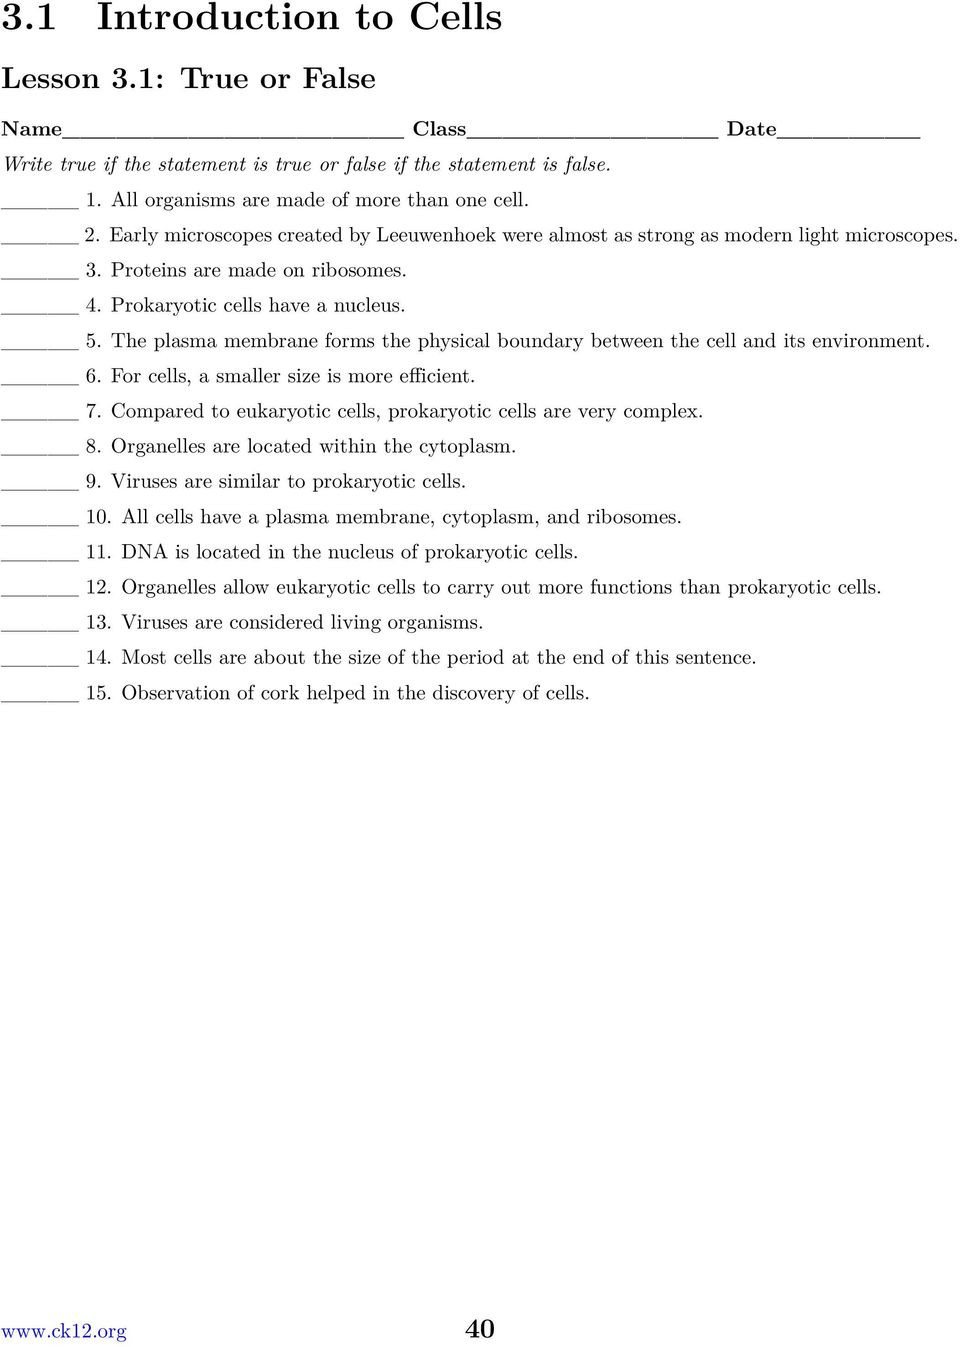 Cell organelles Worksheet Answers Chapter 3 Cellular Structure and Function Worksheets Pdf